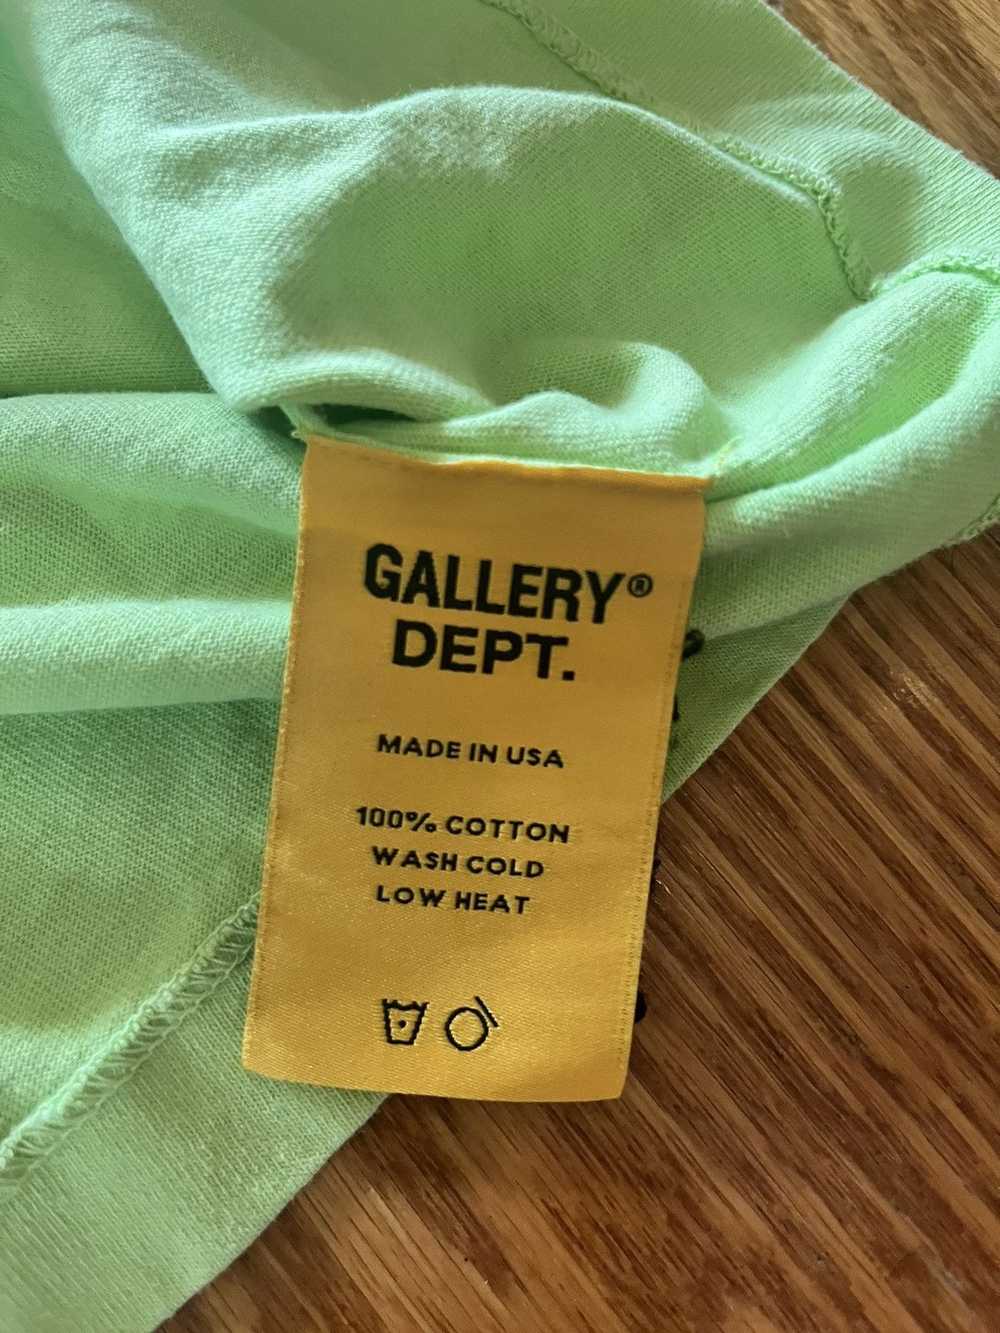 Gallery Dept. Lime Green Gallery Dept. T-shirt - image 5